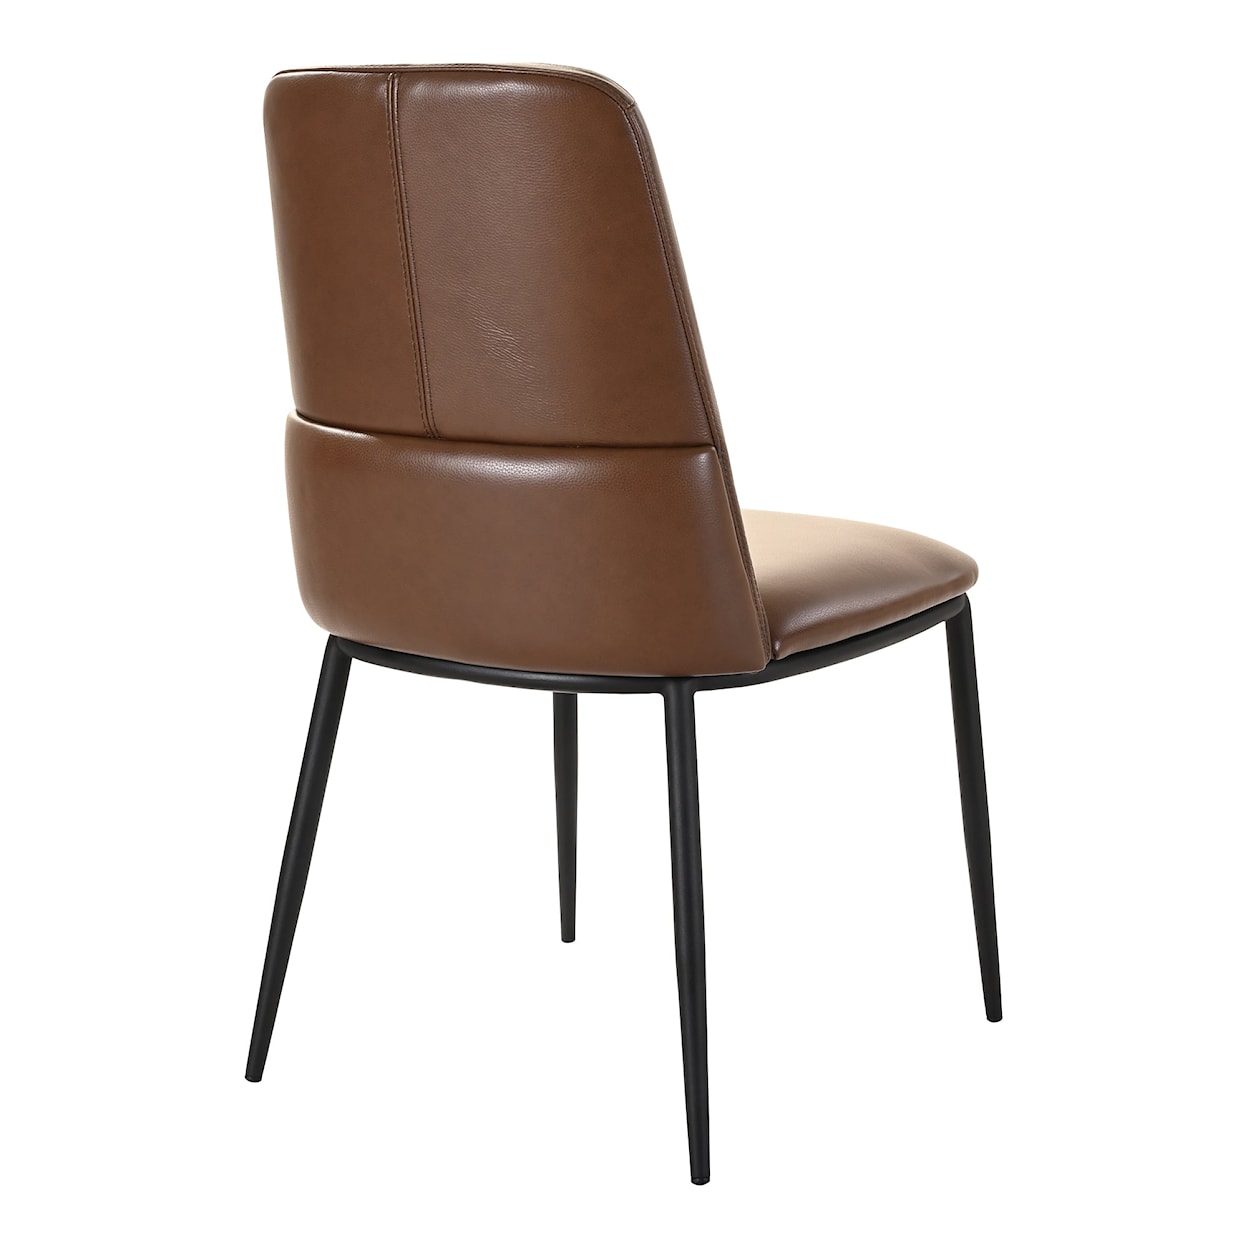 Moe's Home Collection Douglas Leather Dining Chair